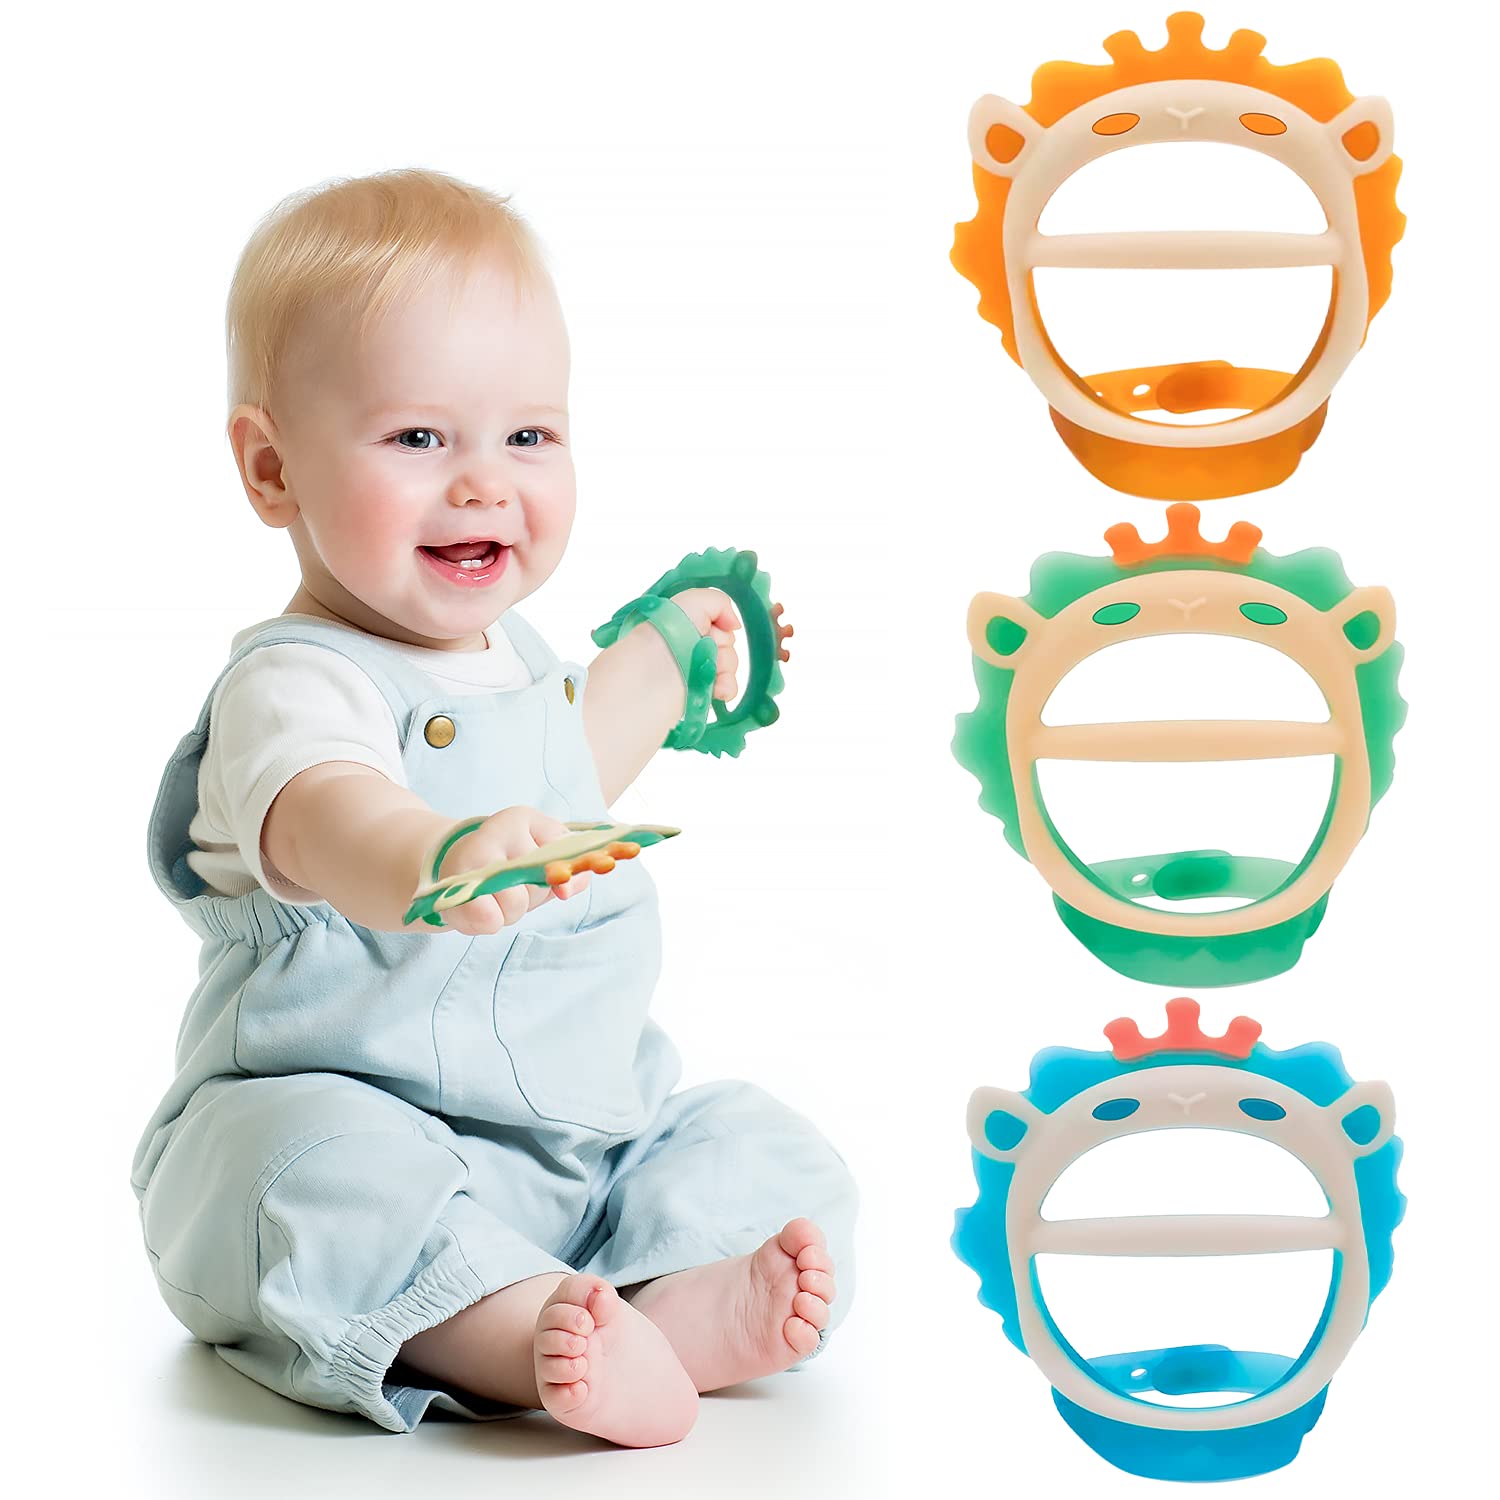 Baby Teething Toys for 0-6 and 6-12 Months Teethers 3packs for Infants, BPA-Free, Eco-Friendly Non-Toxic Silicone, Adjustable Wristband Chew Natural teethers for Babies